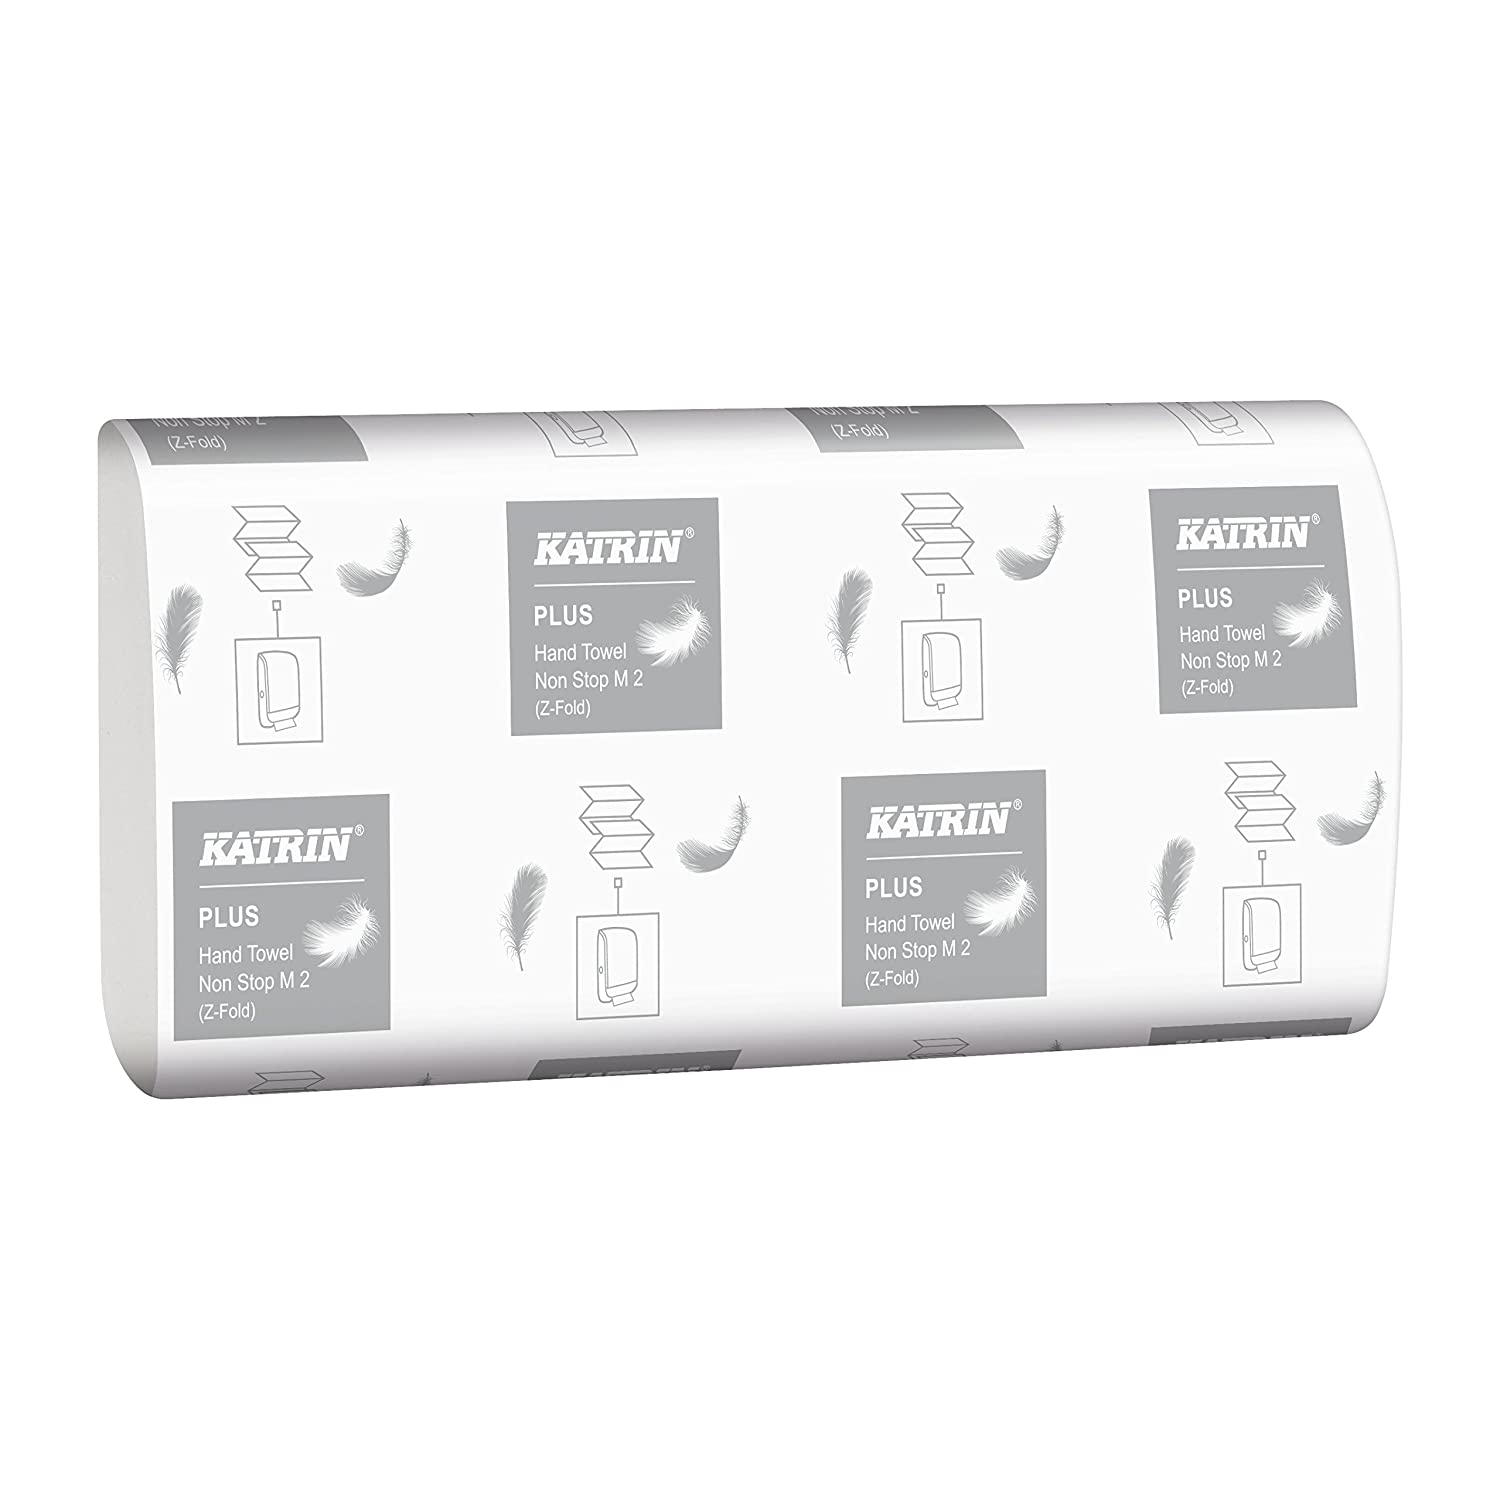 Katrin Plus 2Ply One-Stop M2 - Case of 2025 - 343146